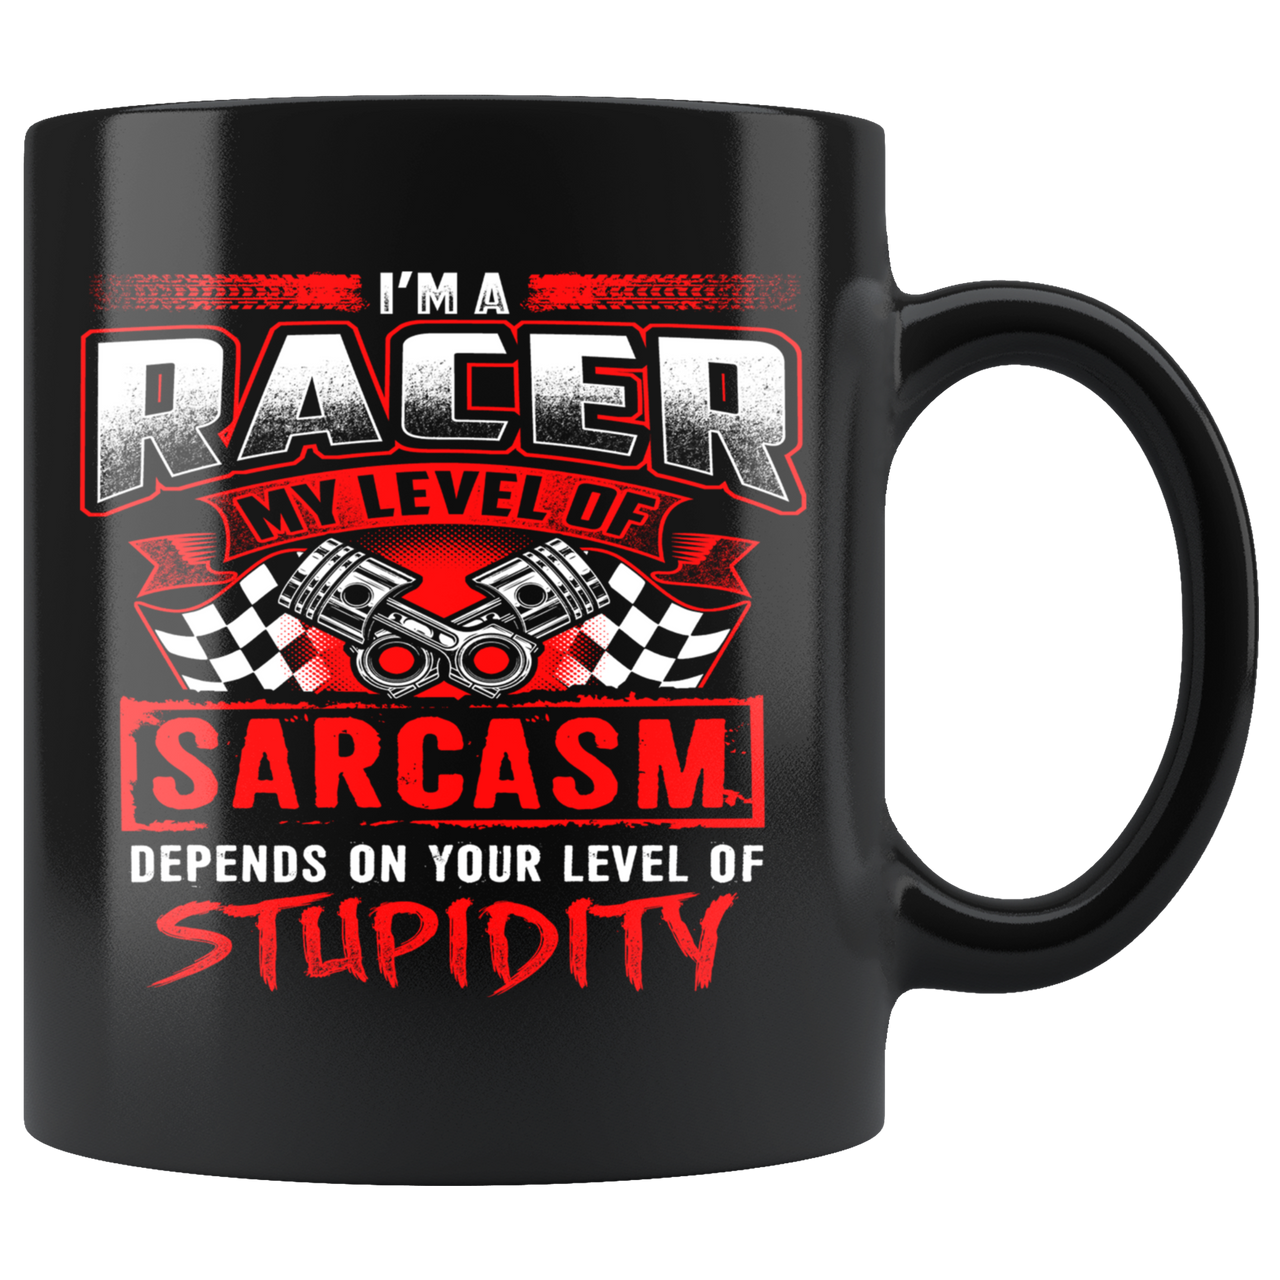 I'm A Racer My Level Of Sarcasm Depends On Your Level of Stupidity Mug!